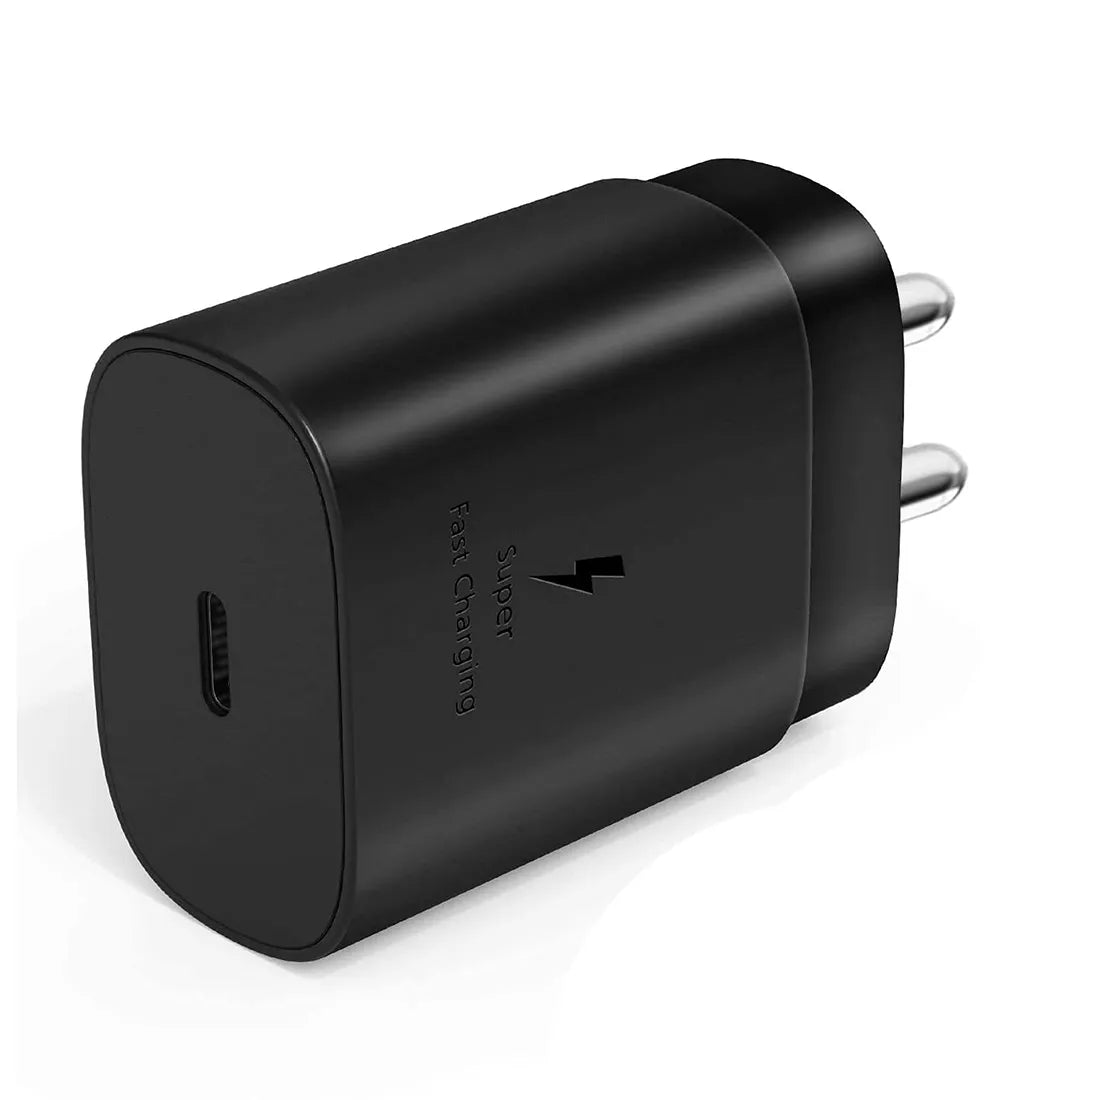 Muvit 25W USB-C Super Fast Charging Adapter for Samsung